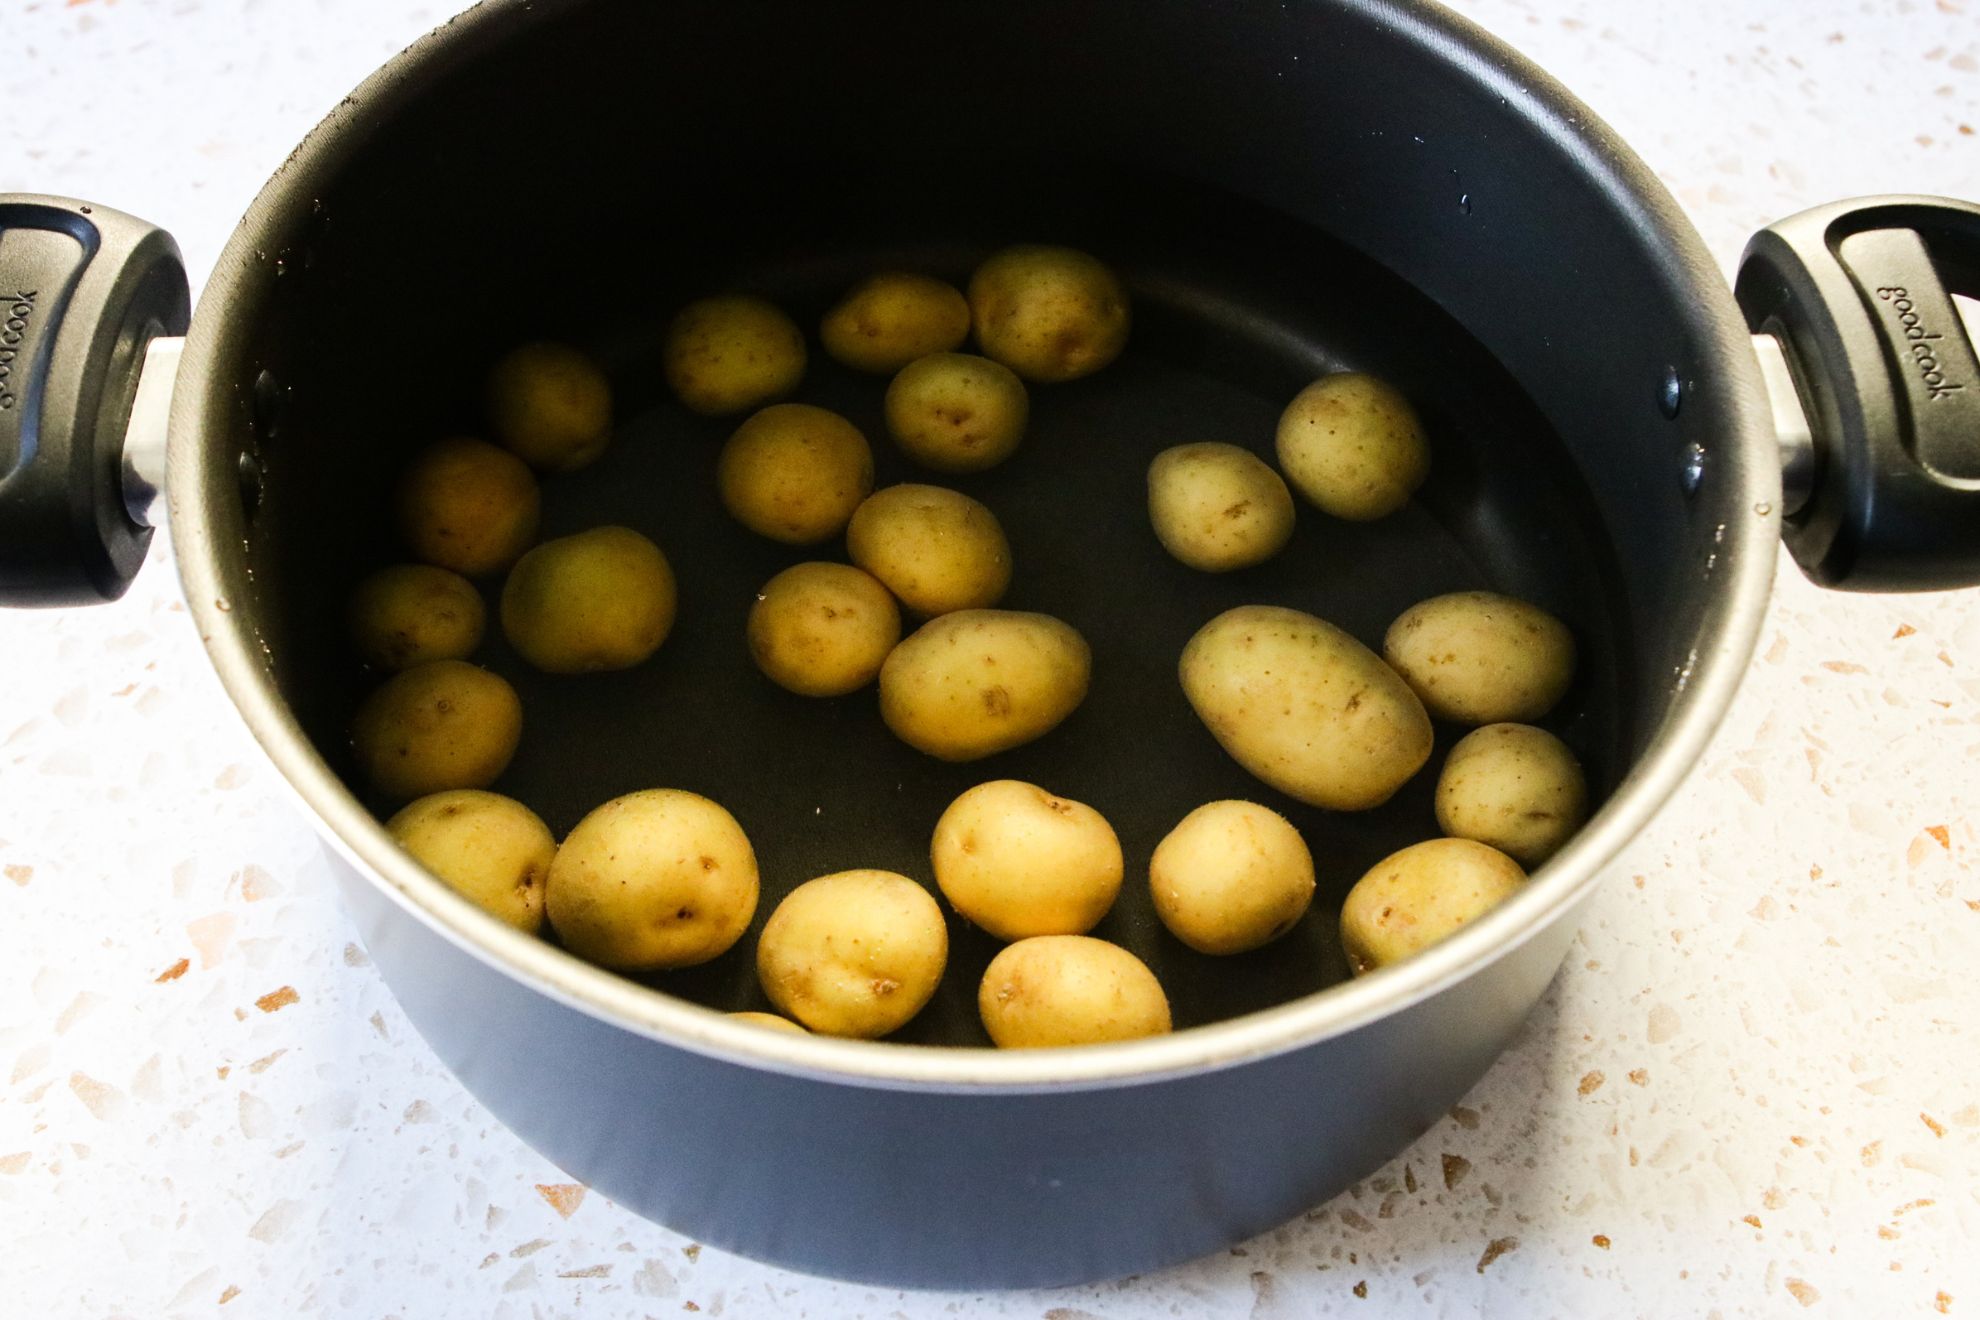 This is a horizontal image looking at a large pot with baby potatoes and water from an angled, overhead view. The pot sits on a white terrazzo surface.